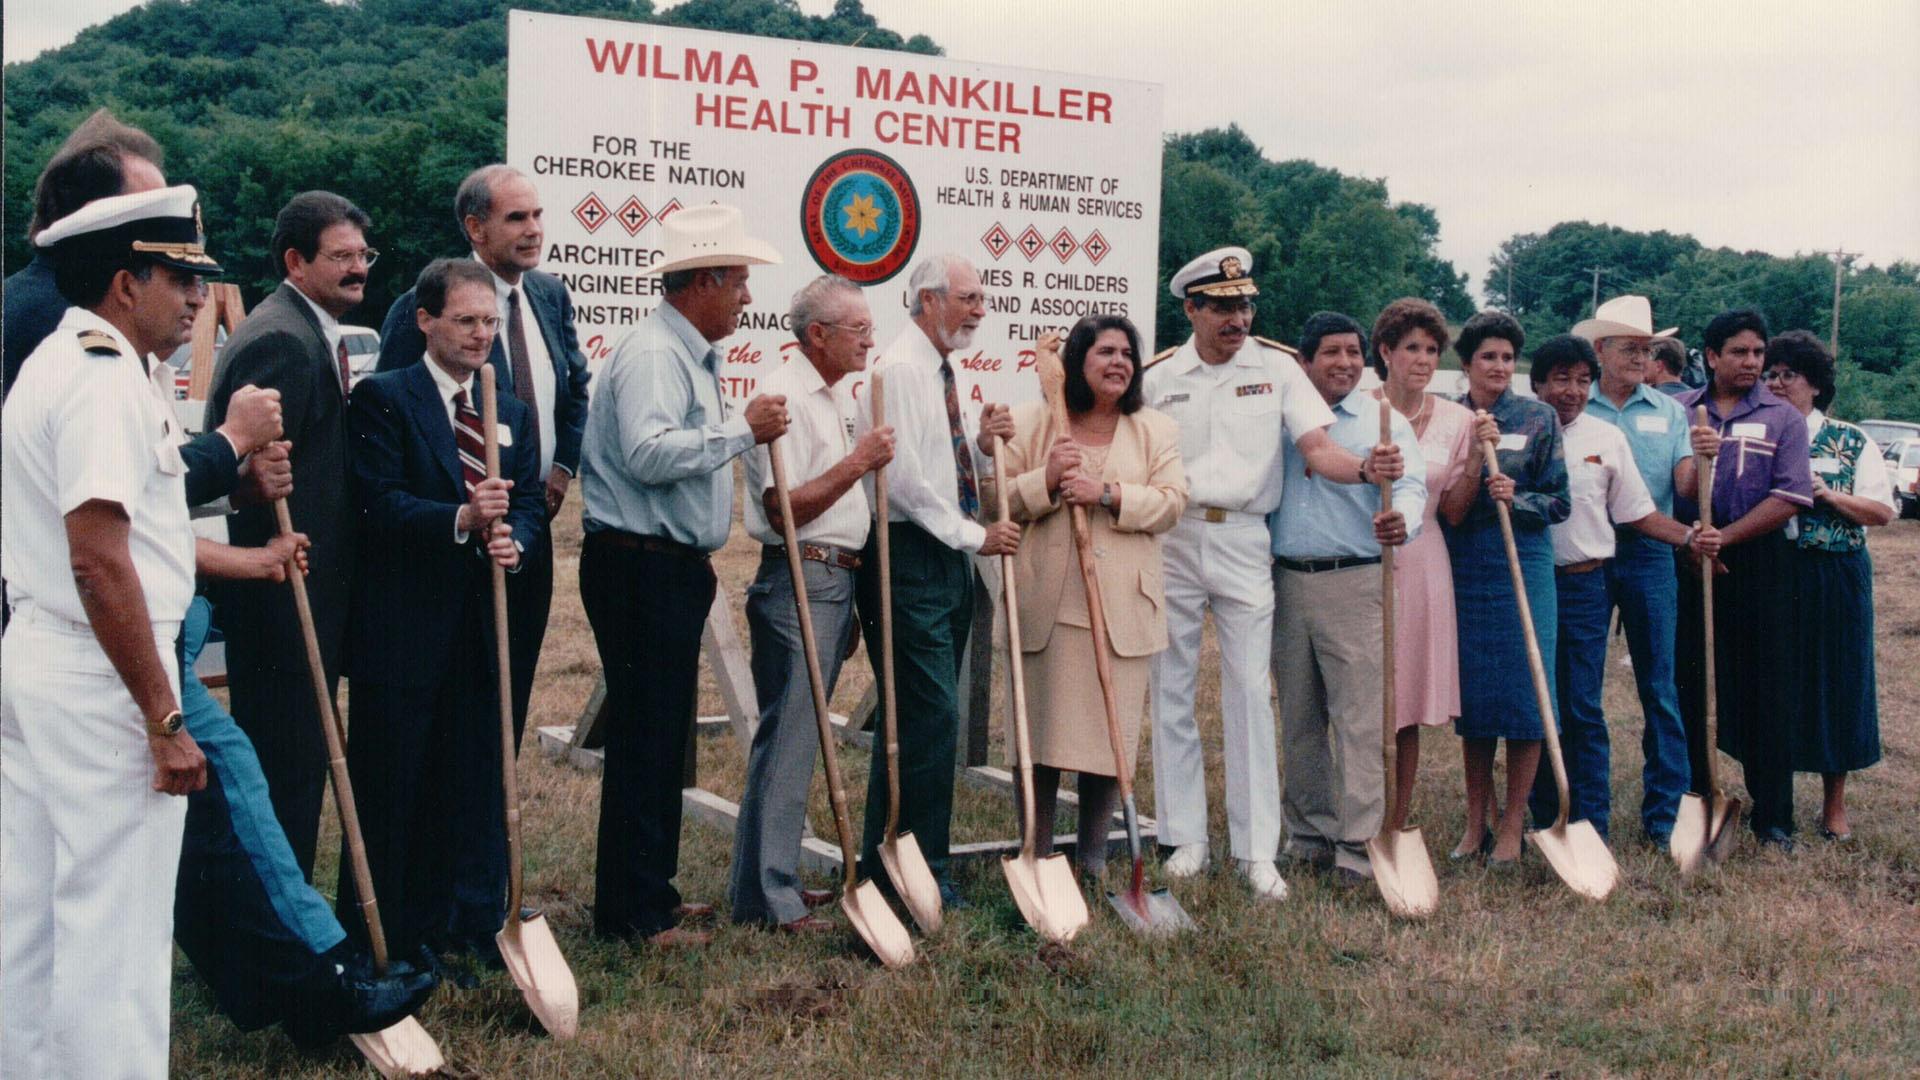 Wilma Mankiller and colleagues hold ceremonial shovels.